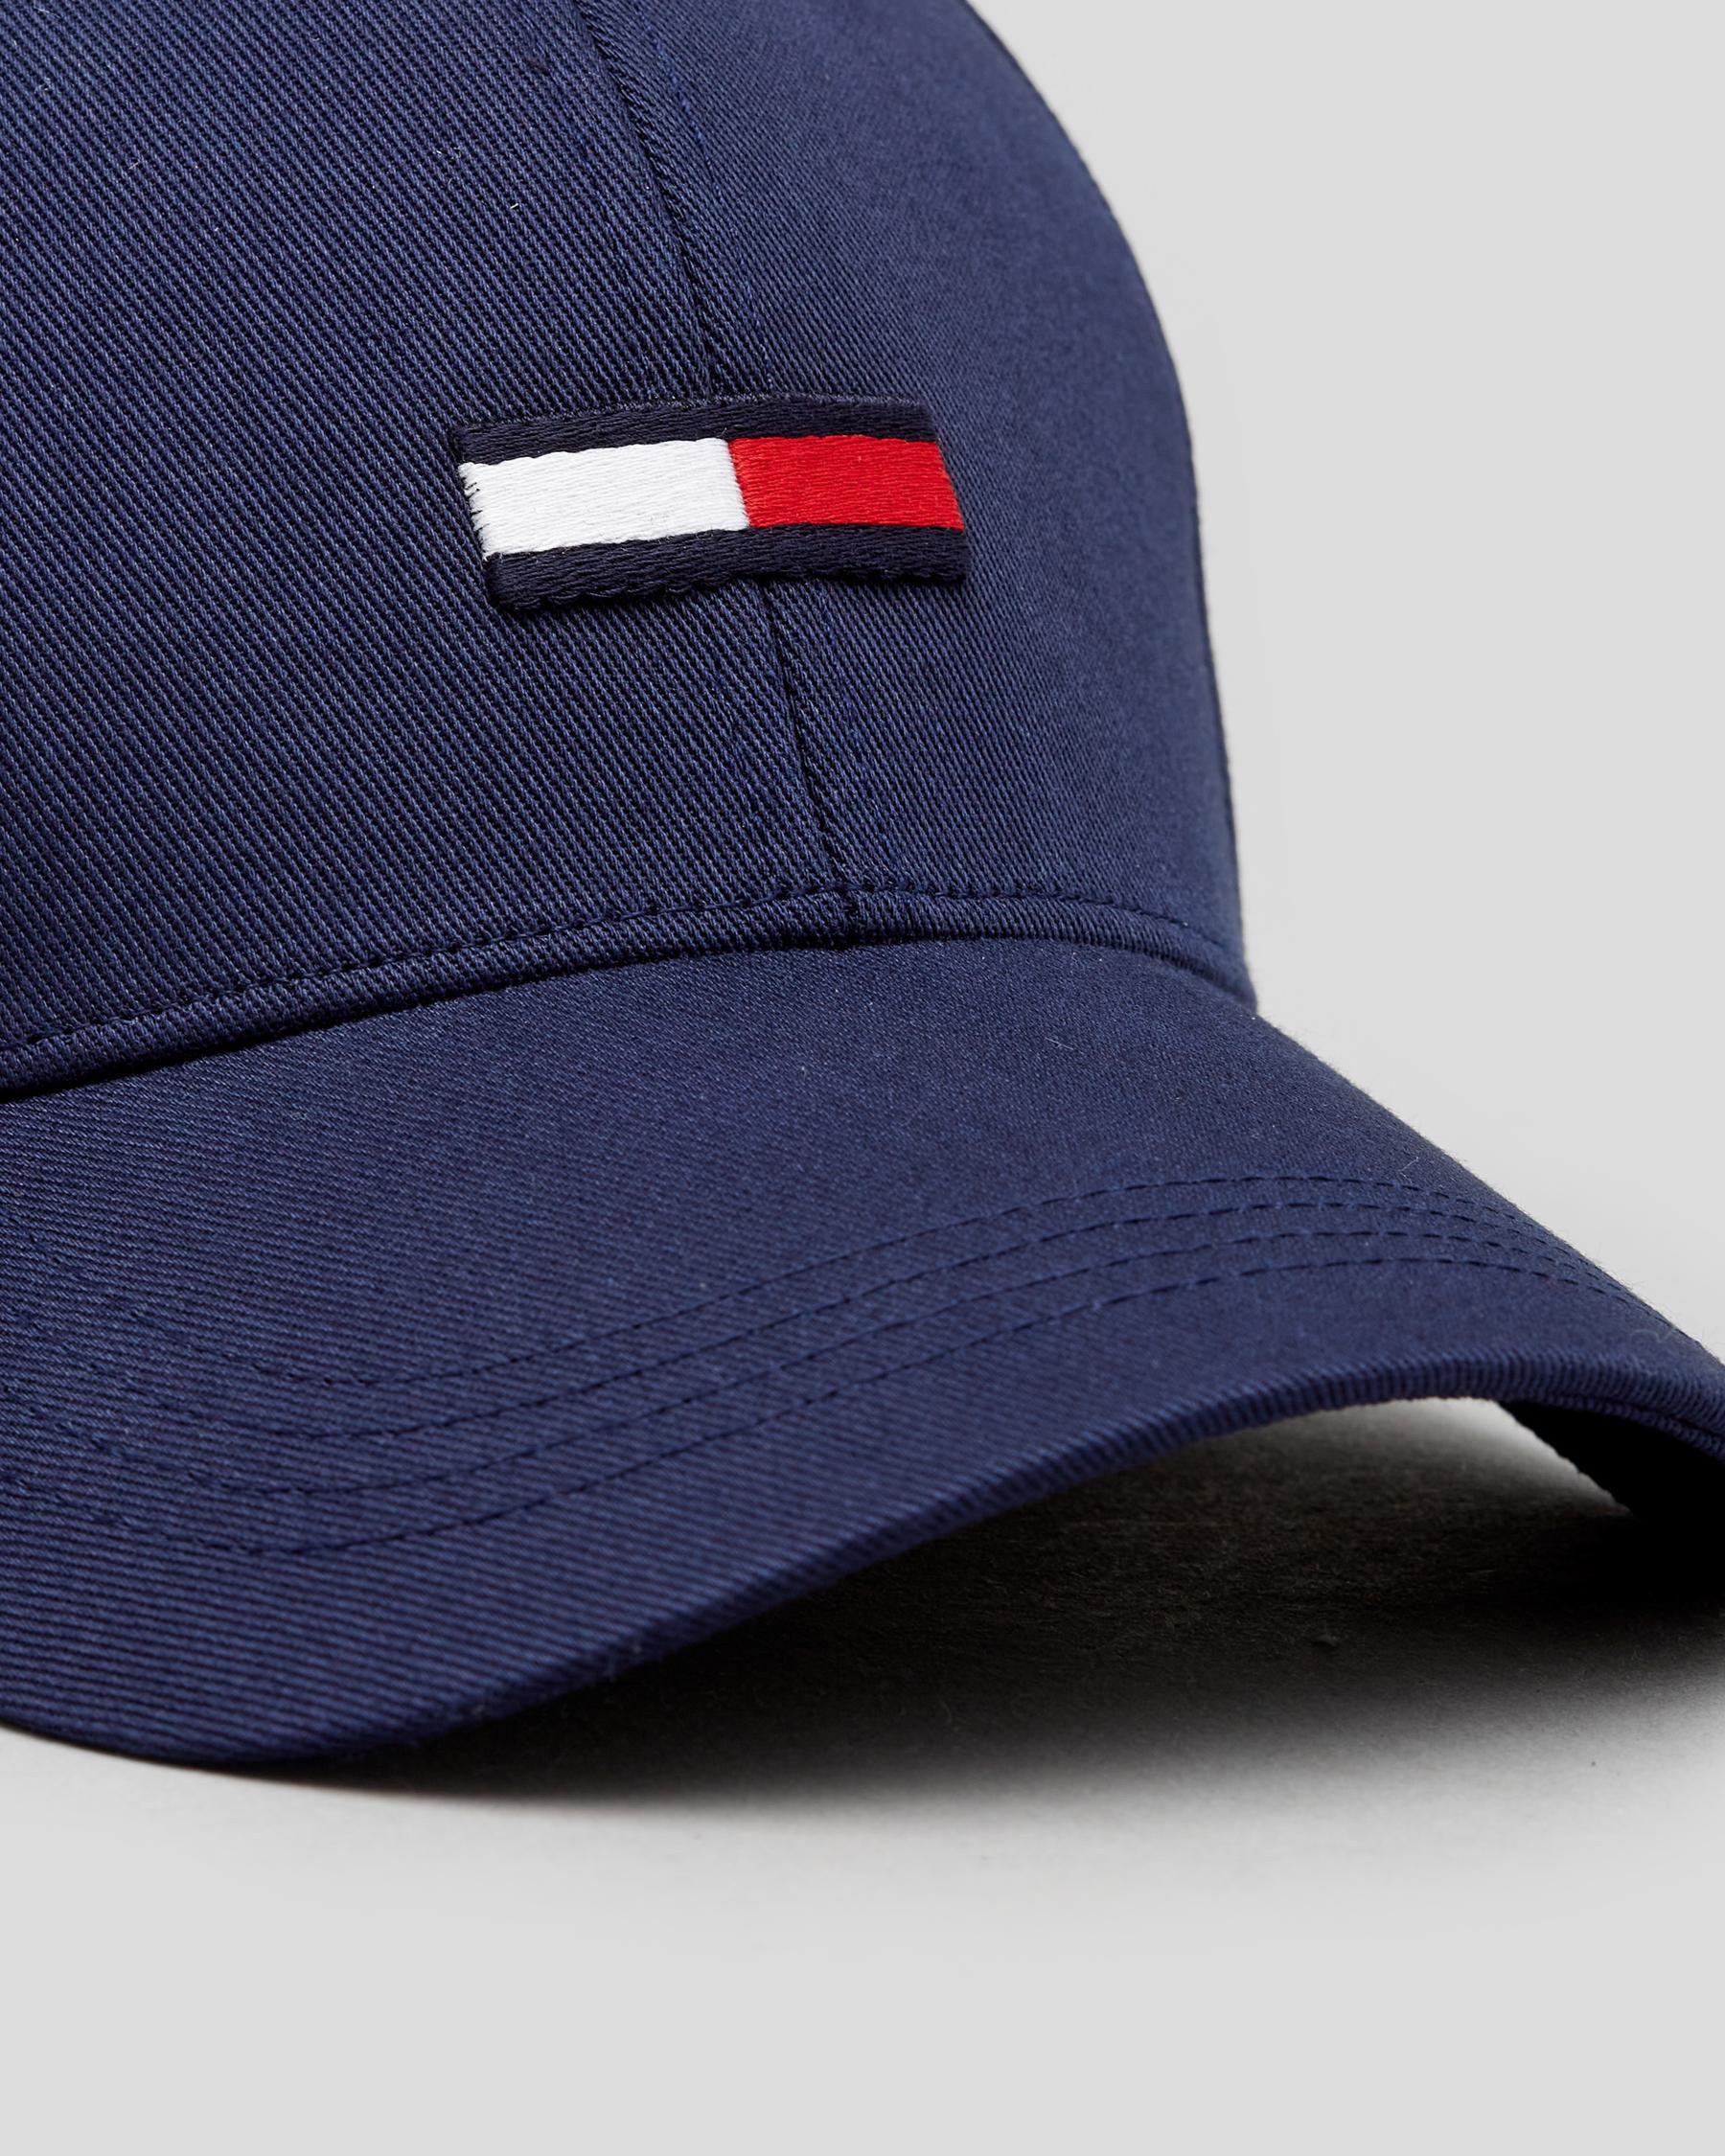 Beach Twilight - Navy Returns Easy In Flag & City Cap Tommy FREE* United TJM Hilfiger States - Shipping